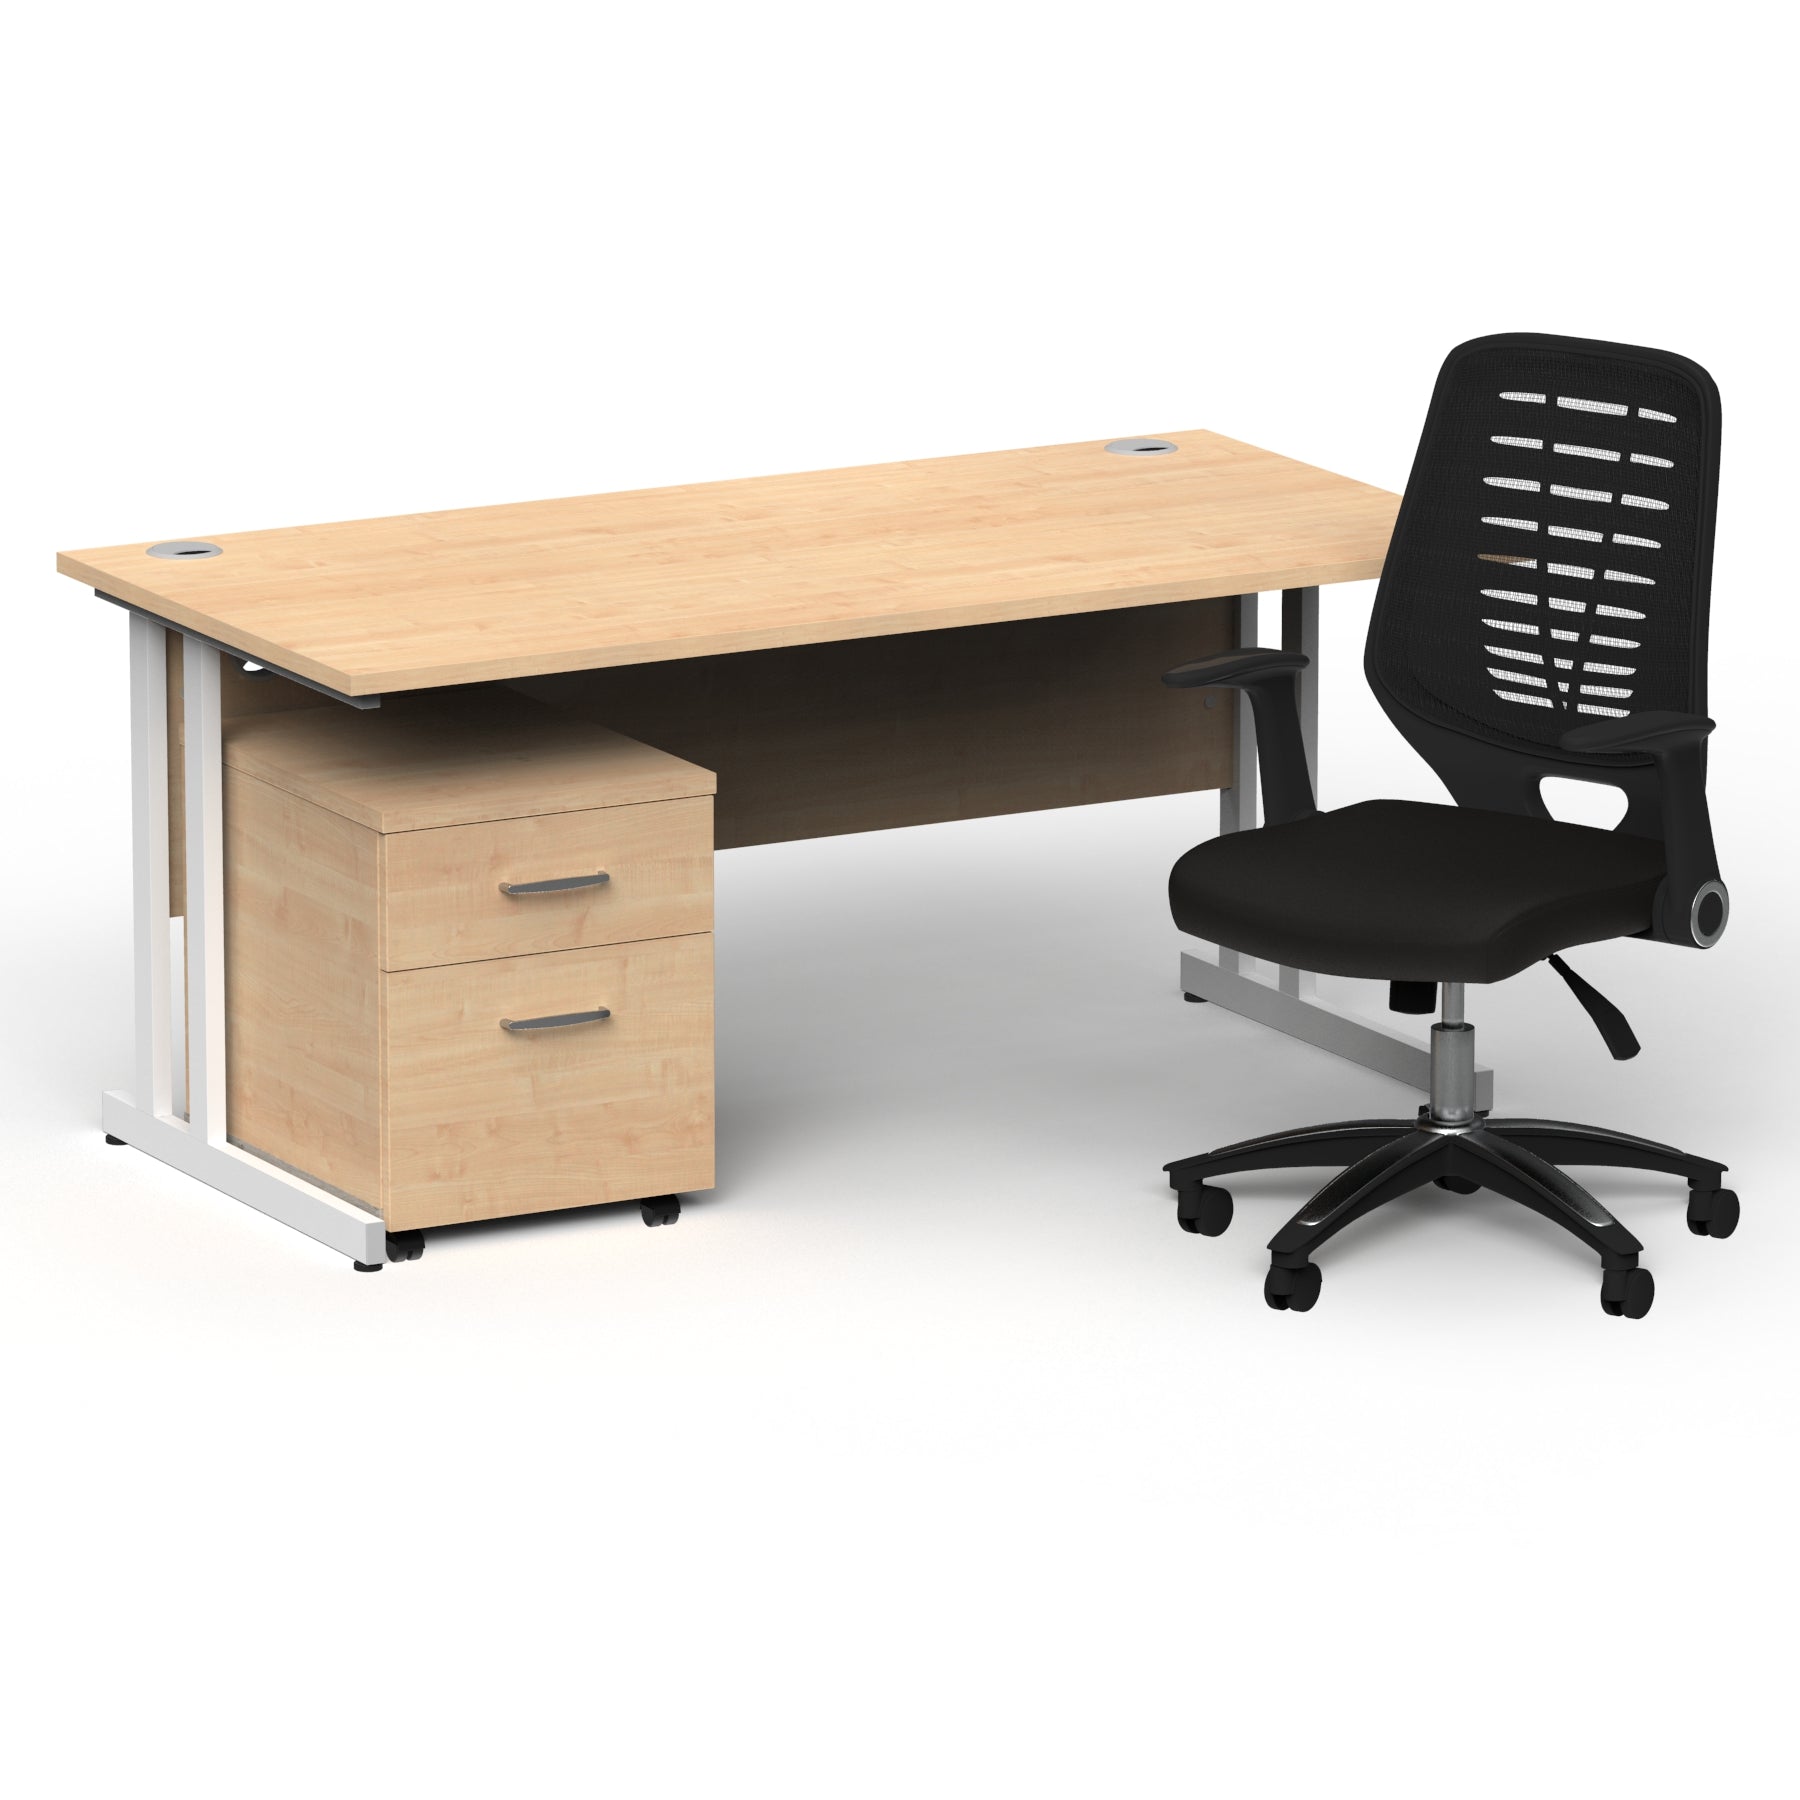 Impulse 1600mm Cantilever Straight Desk & Mobile Pedestal with Relay Black Back Operator Chair - MFC Material, 5-Year Furniture Guarantee